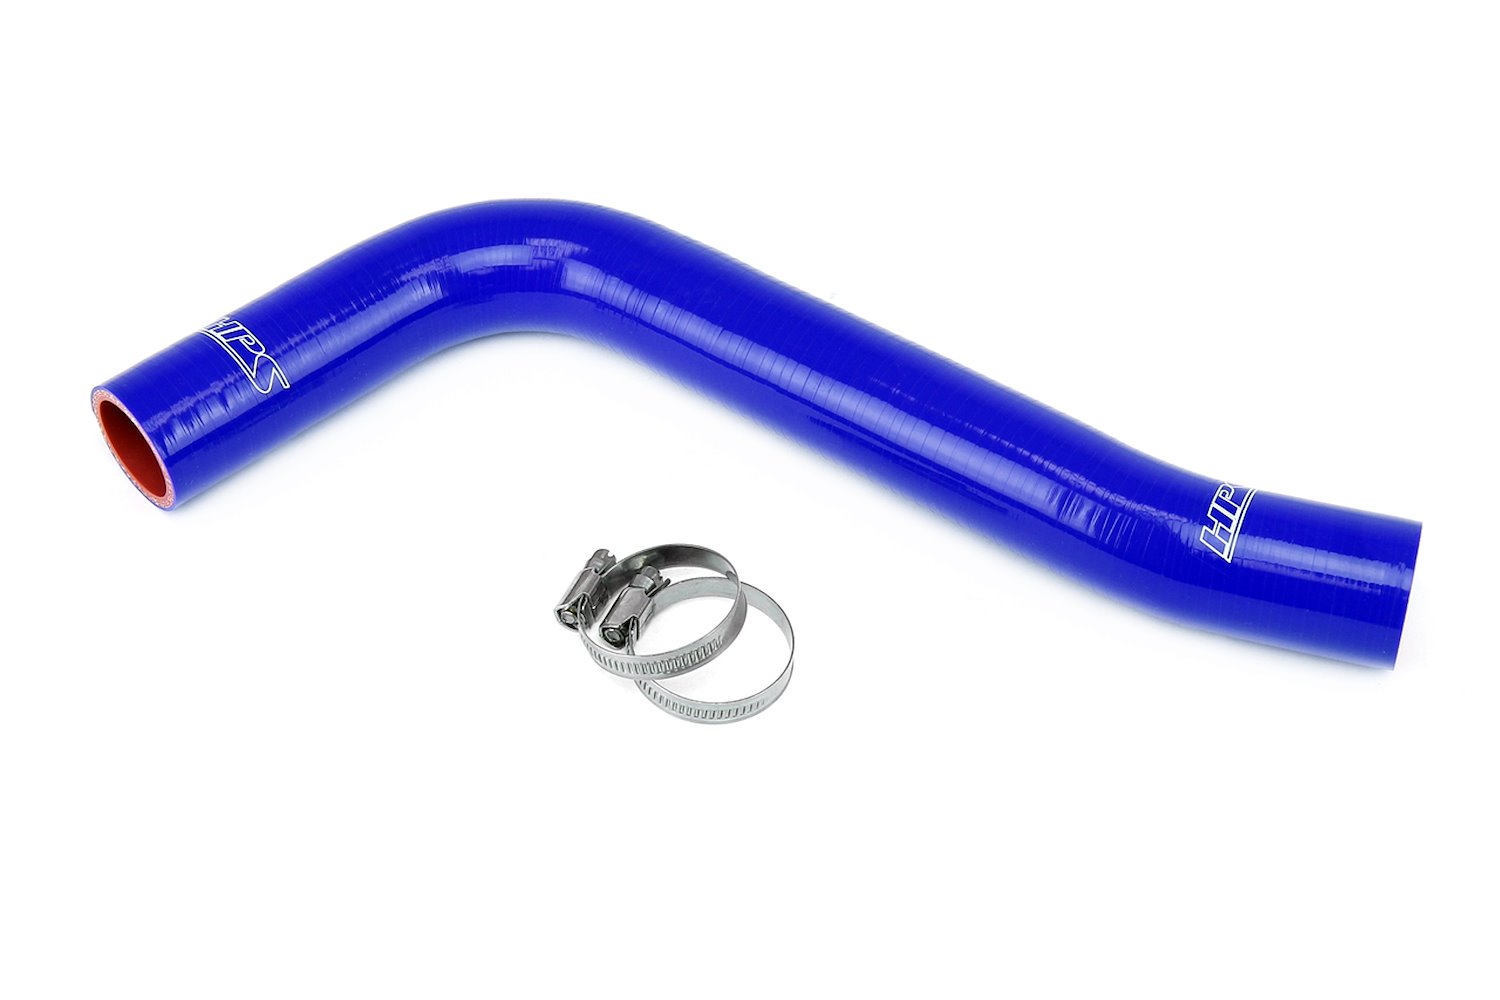 57-1215U-BLUE Radiator Hose Kit, 3-Ply Reinforced Silicone, Replaces Upper Rubber Radiator Coolant Hose.